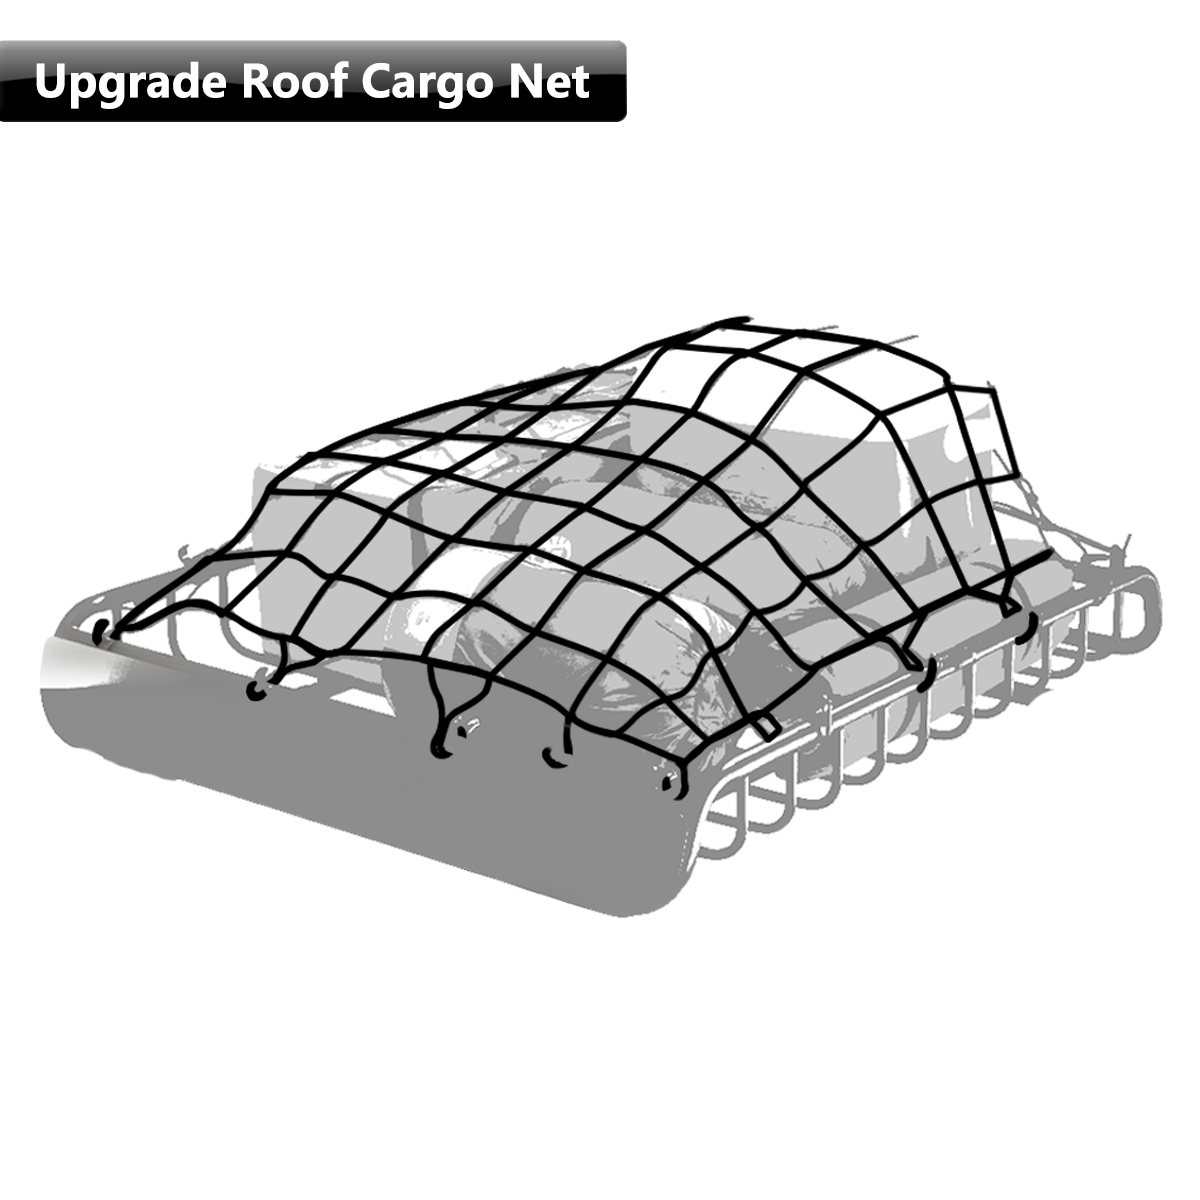 OwnMy 3’ x 4’ Heavy Duty Bungee Cargo Net Grid Mesh Roof Rack Net with 12 PCS ABS Hooks for Pickup Truck Bed and SUV Roof Travel Luggage Rack 